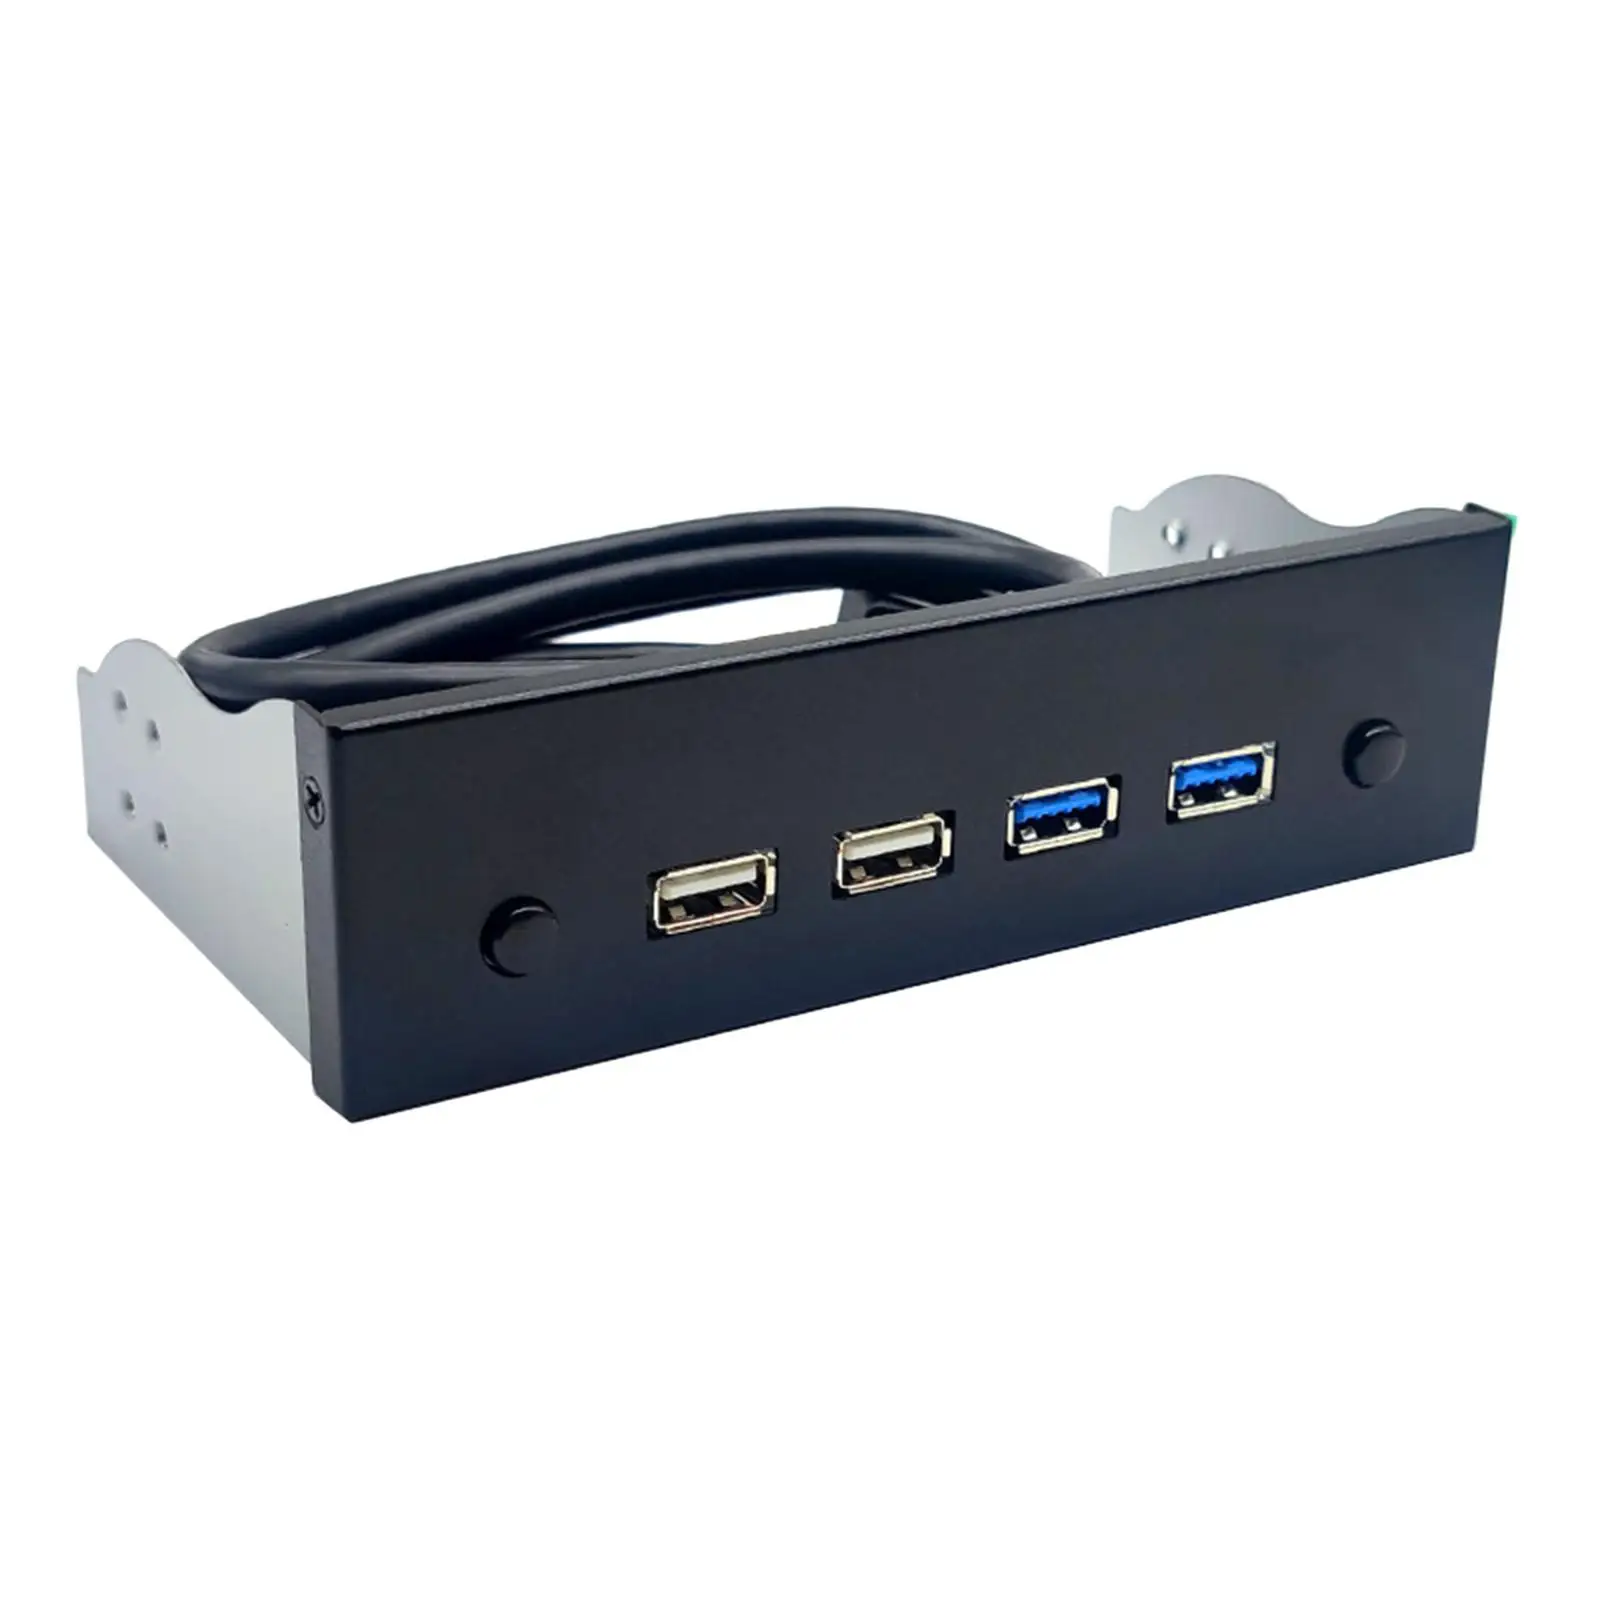 5.25` Front Panel Hub, USB Optical Drive Bay, for PC Computer Case PC Front Panel High Speed Computer Expansion Board